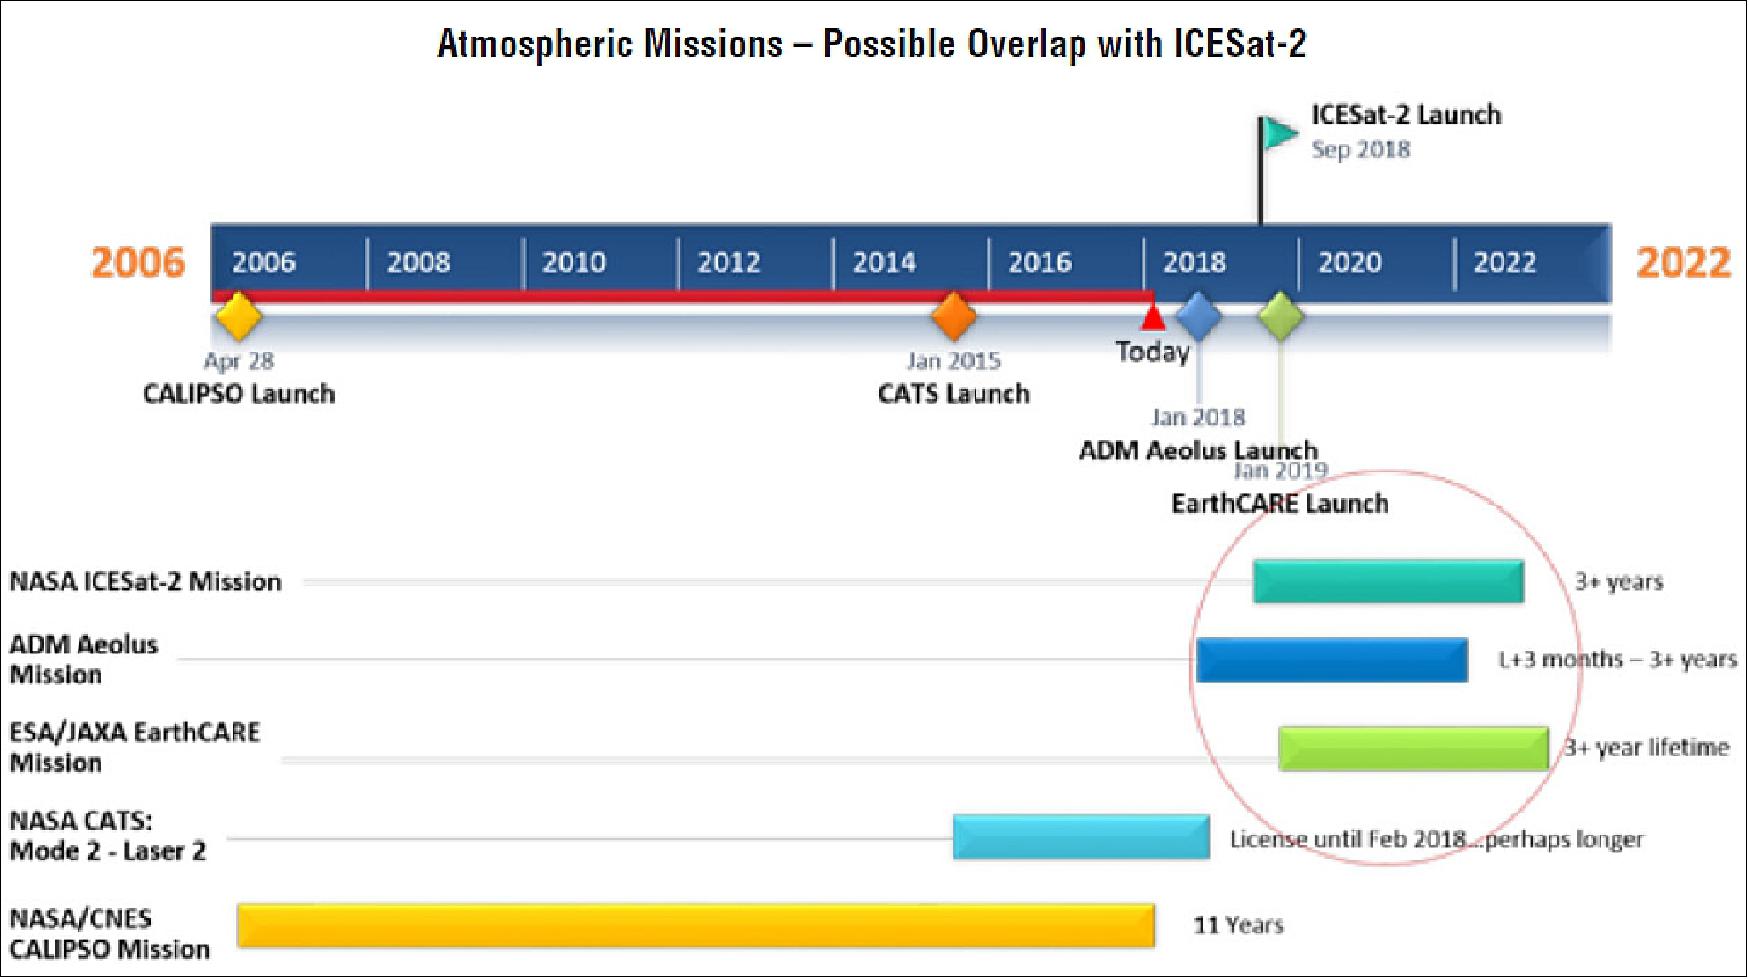 Figure 56: The bar chart shows the current projected timetables for the atmospheric missions. The circle shows the area of possible overlap with ICESat-2 (image credit: NASA, Sabrina Delgado Arias)